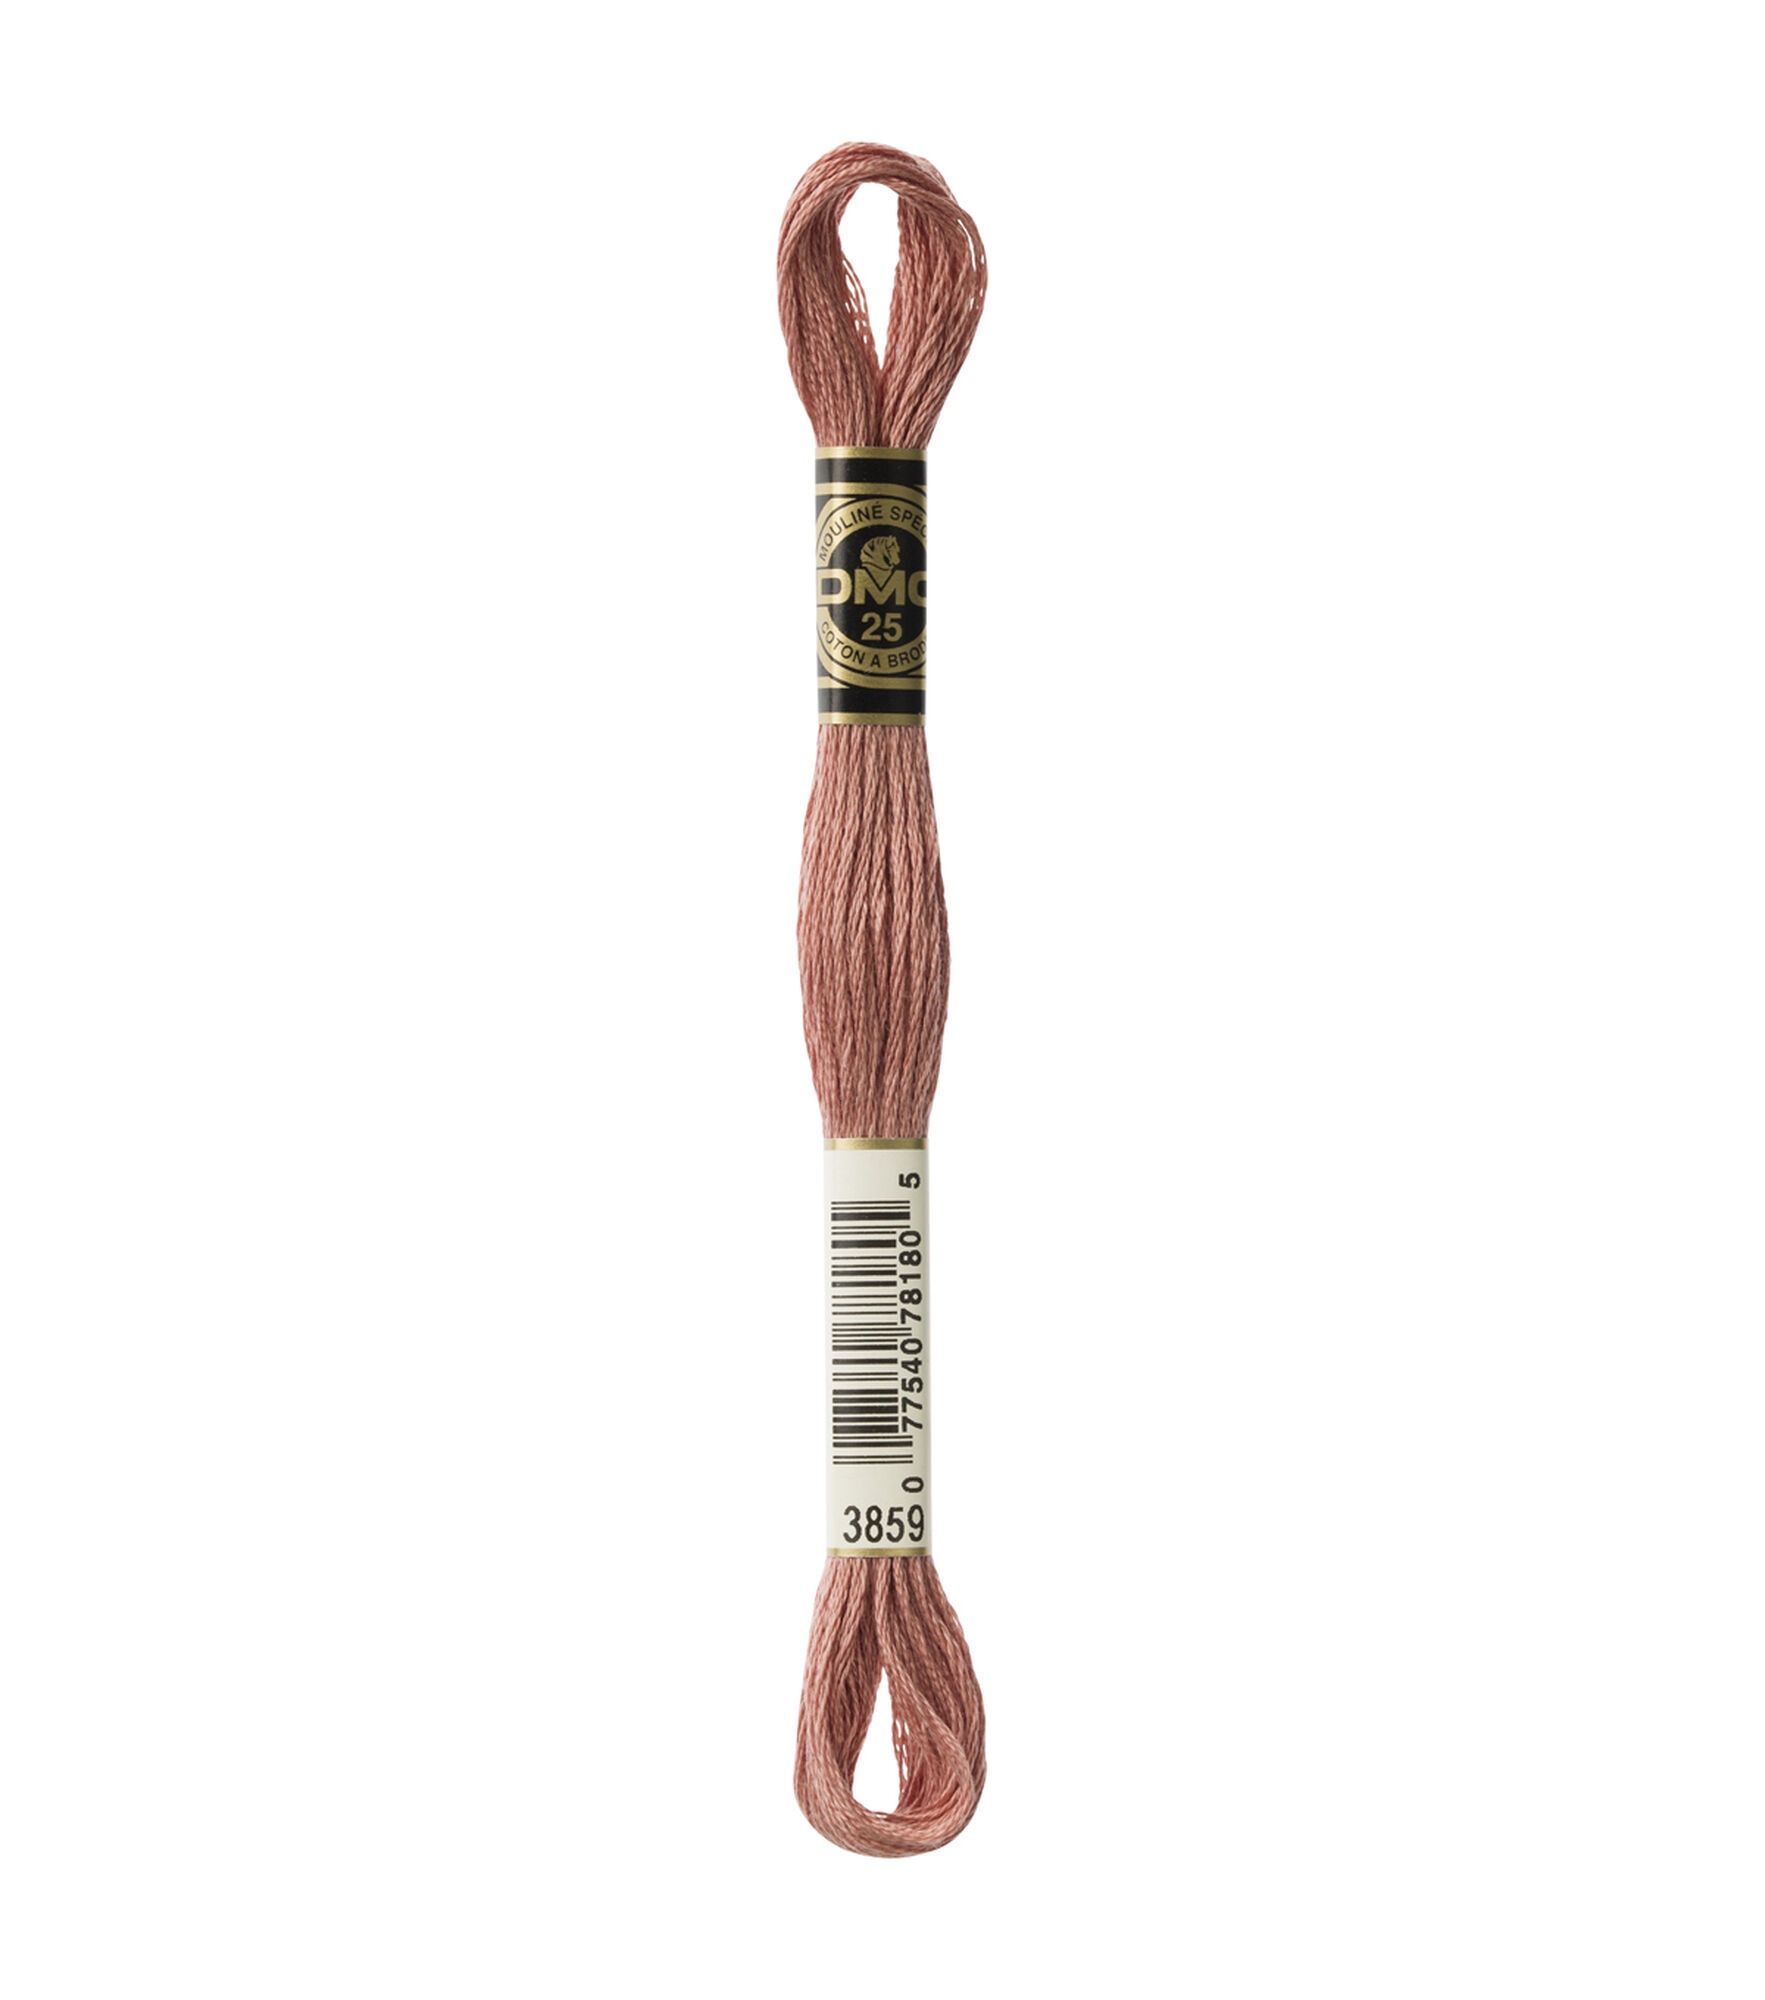 DMC 8.7yd Pink 6 Strand Cotton Embroidery Floss, 3859 Light Rosewood, hi-res